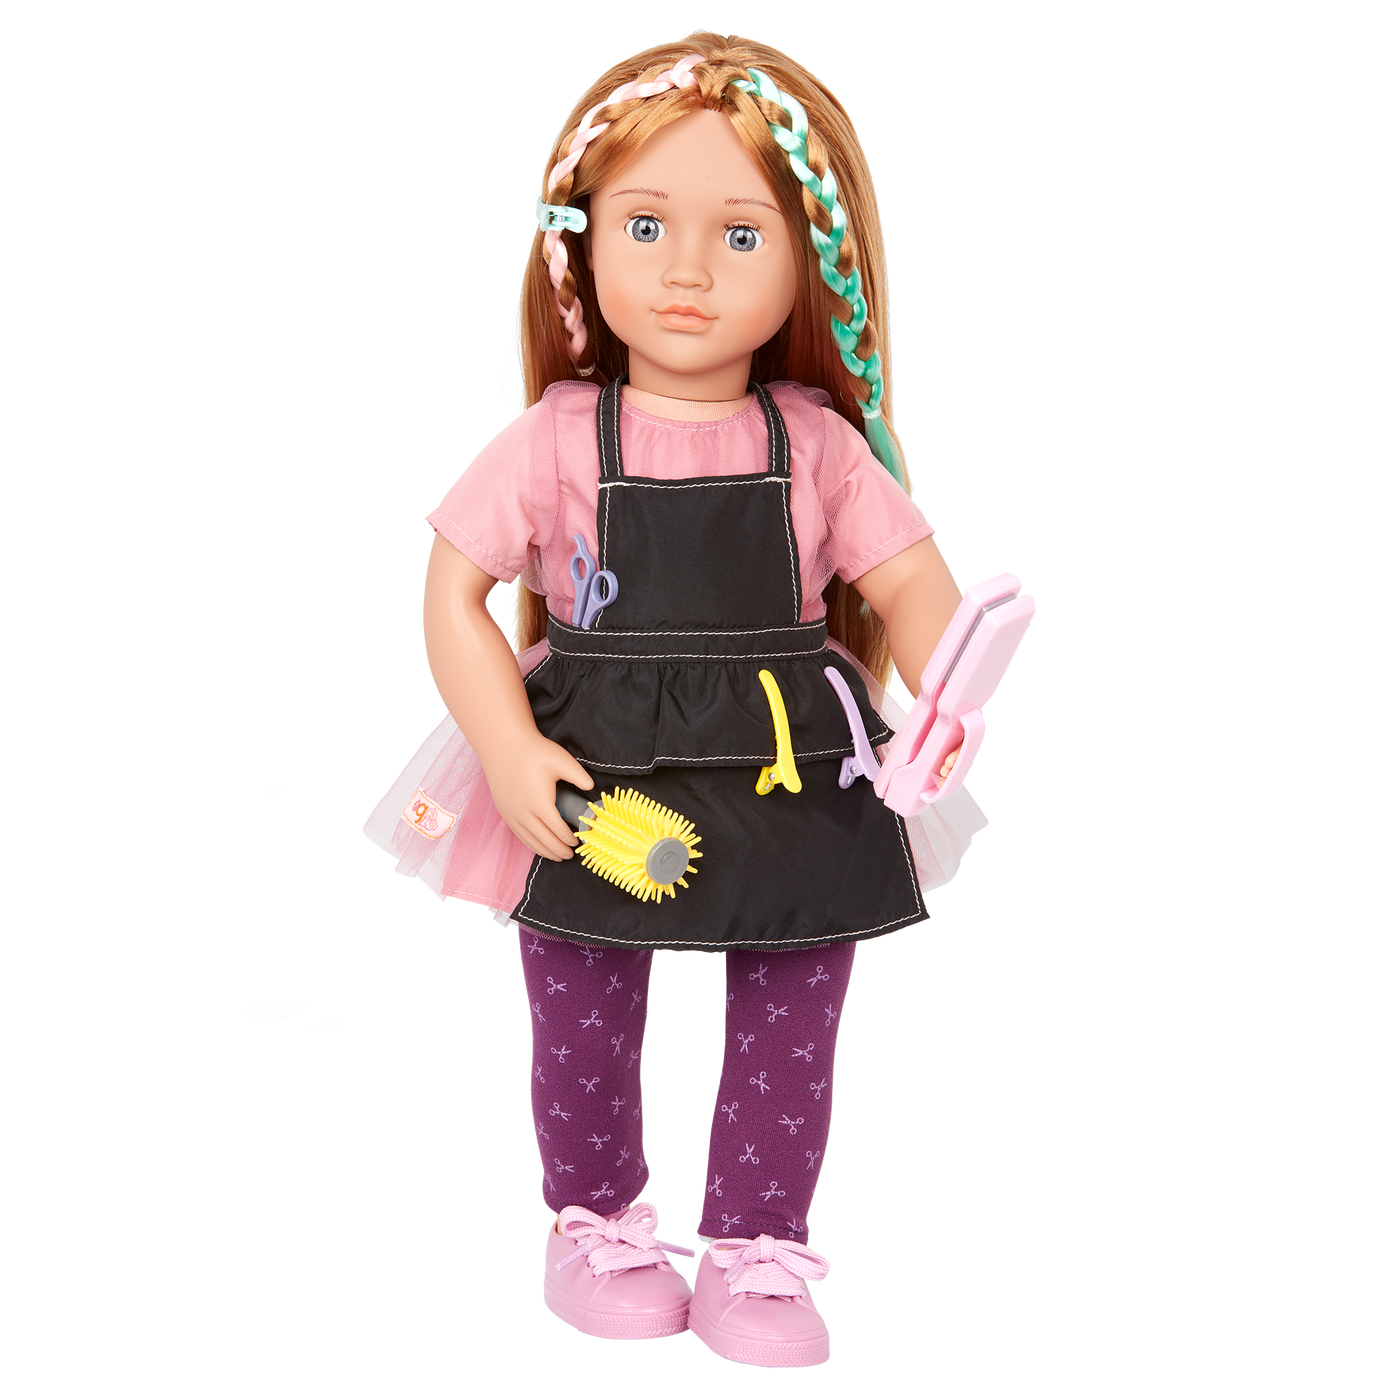 Our Generation Highlight My Day Hair Salon Set for 18-inch Dolls